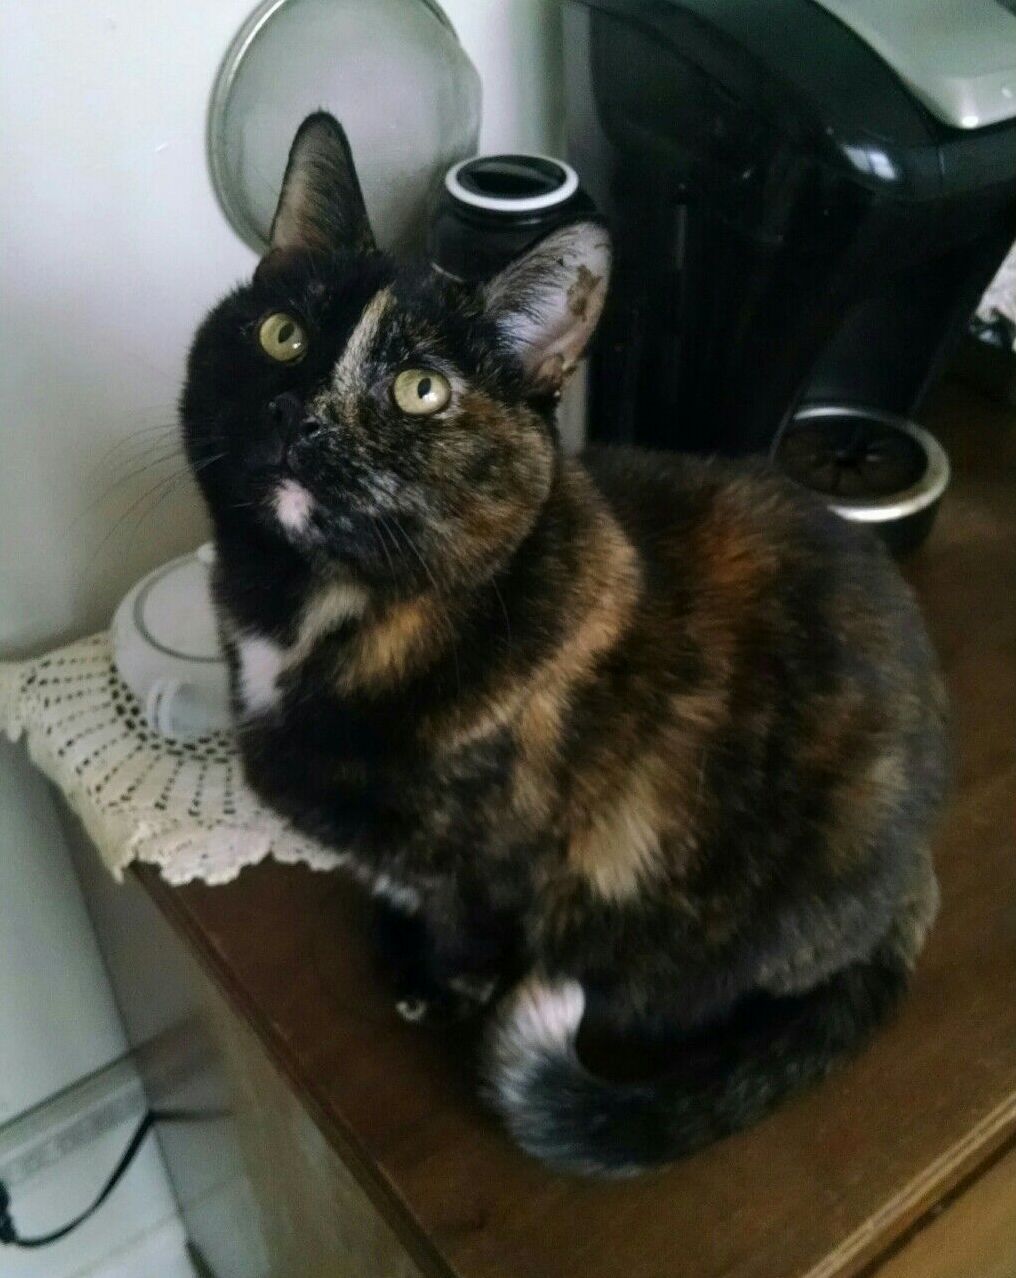 I had to say goodbye to my pretty kitty toffee today. she was well loved and will be very missed.